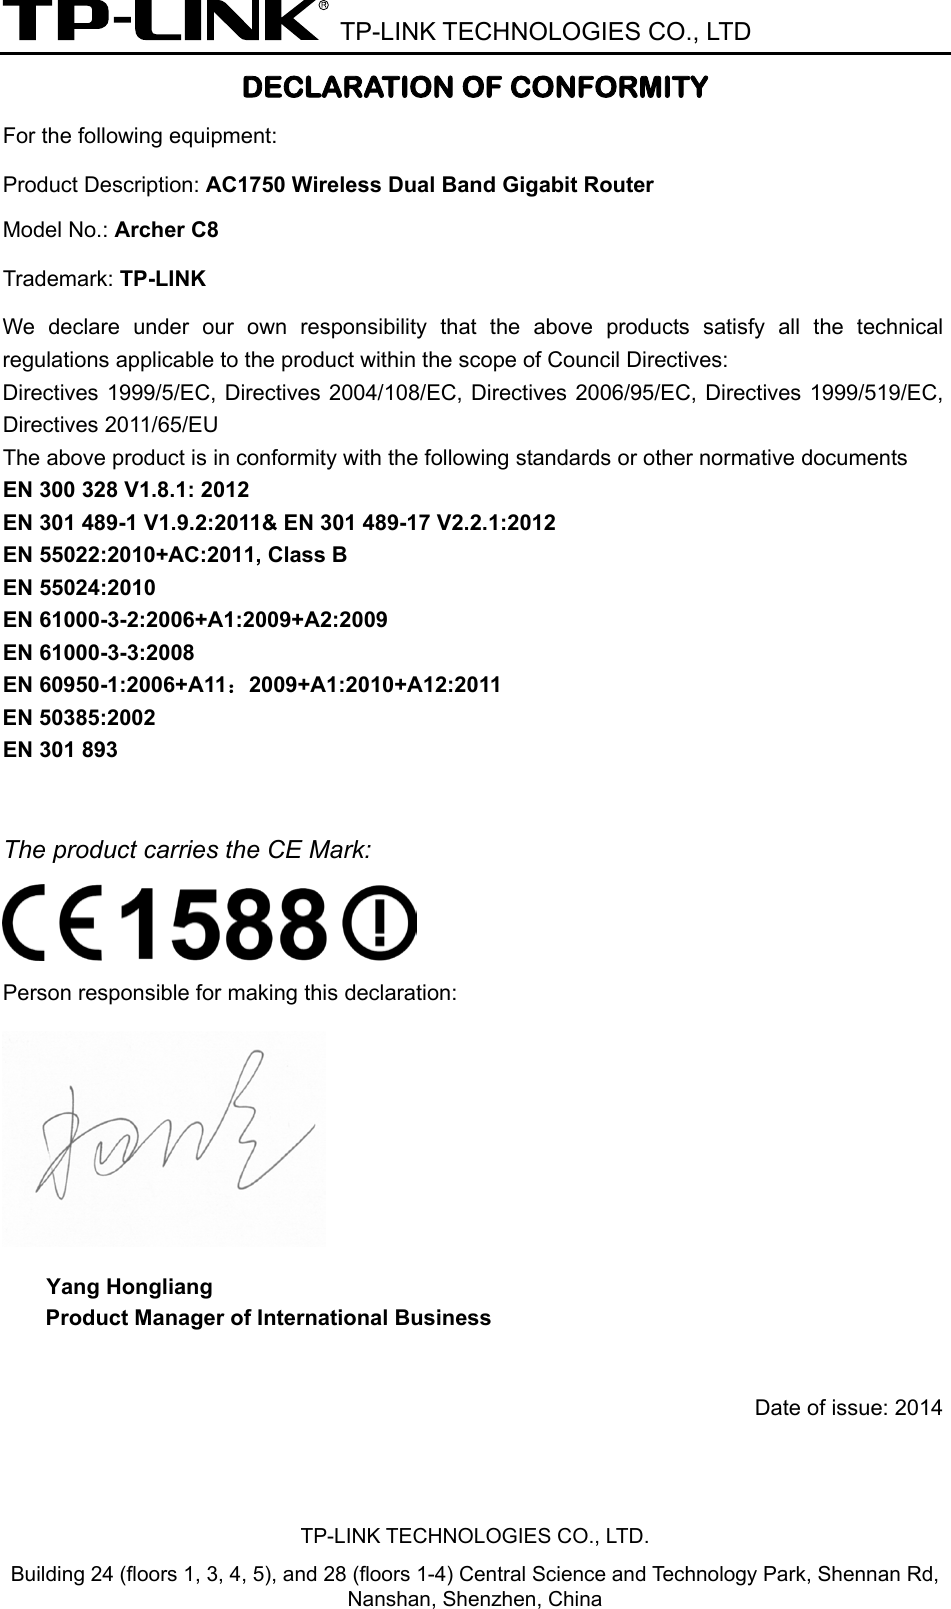  TP-LINK TECHNOLOGIES CO., LTD TP-LINK TECHNOLOGIES CO., LTD. Building 24 (floors 1, 3, 4, 5), and 28 (floors 1-4) Central Science and Technology Park, Shennan Rd, Nanshan, Shenzhen, China DECLARATION OF CONFORMITY For the following equipment: Product Description: AC1750 Wireless Dual Band Gigabit Router Model No.: Archer C8 Trademark: TP-LINK  We declare under our own responsibility that the above products satisfy all the technical regulations applicable to the product within the scope of Council Directives:     Directives 1999/5/EC, Directives 2004/108/EC, Directives 2006/95/EC, Directives 1999/519/EC, Directives 2011/65/EU The above product is in conformity with the following standards or other normative documents EN 300 328 V1.8.1: 2012 EN 301 489-1 V1.9.2:2011&amp; EN 301 489-17 V2.2.1:2012 EN 55022:2010+AC:2011, Class B EN 55024:2010 EN 61000-3-2:2006+A1:2009+A2:2009 EN 61000-3-3:2008 EN 60950-1:2006+A11：2009+A1:2010+A12:2011 EN 50385:2002 EN 301 893  The product carries the CE Mark:  Person responsible for making this declaration:  Yang Hongliang Product Manager of International Business    Date of issue: 2014